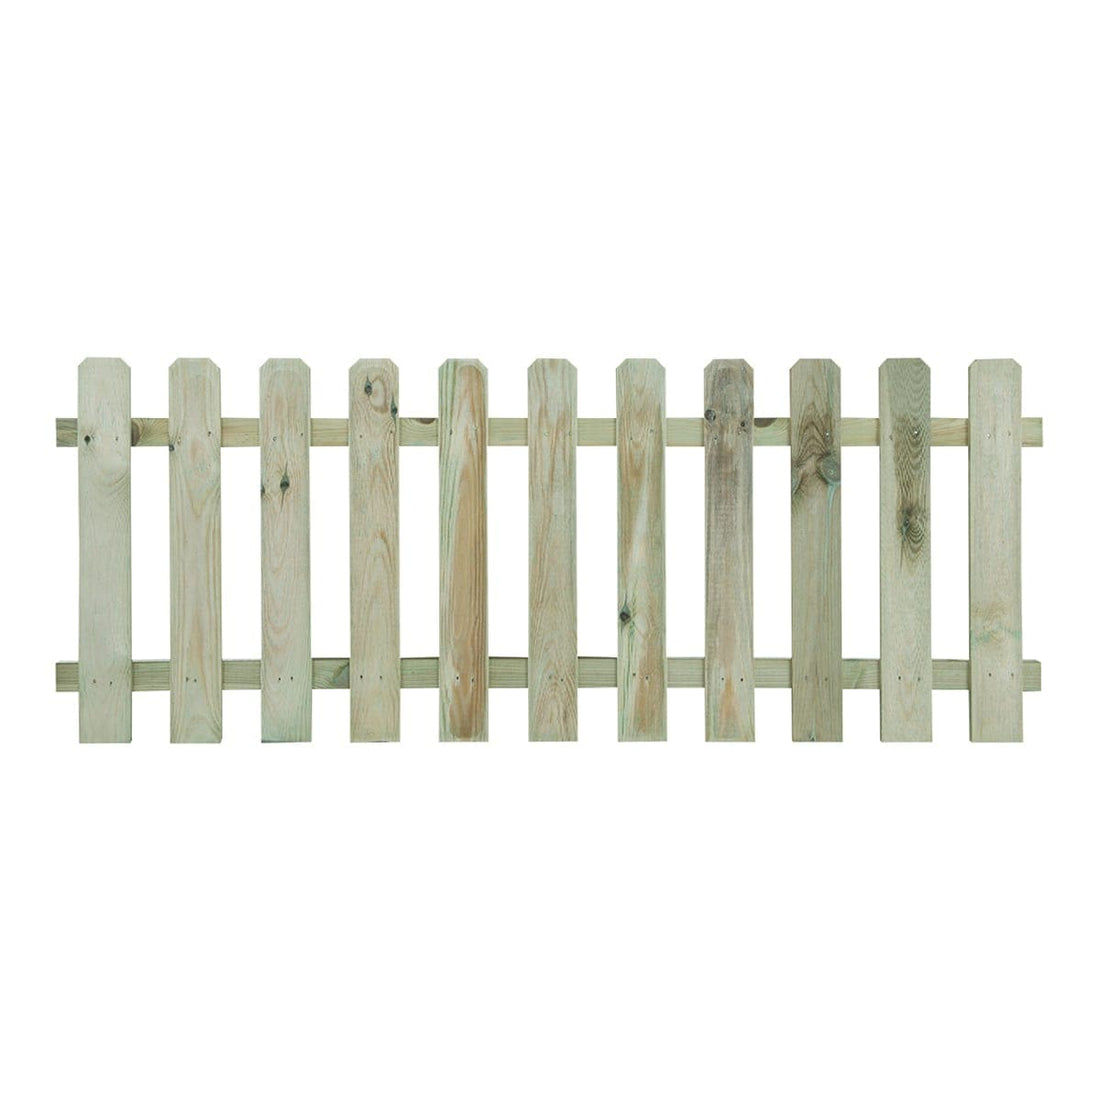 STRAIGHT FENCE 180 X H 70 CM MADE OF AUTOCLAVE-TREATED PINE WOOD - best price from Maltashopper.com BR500008531